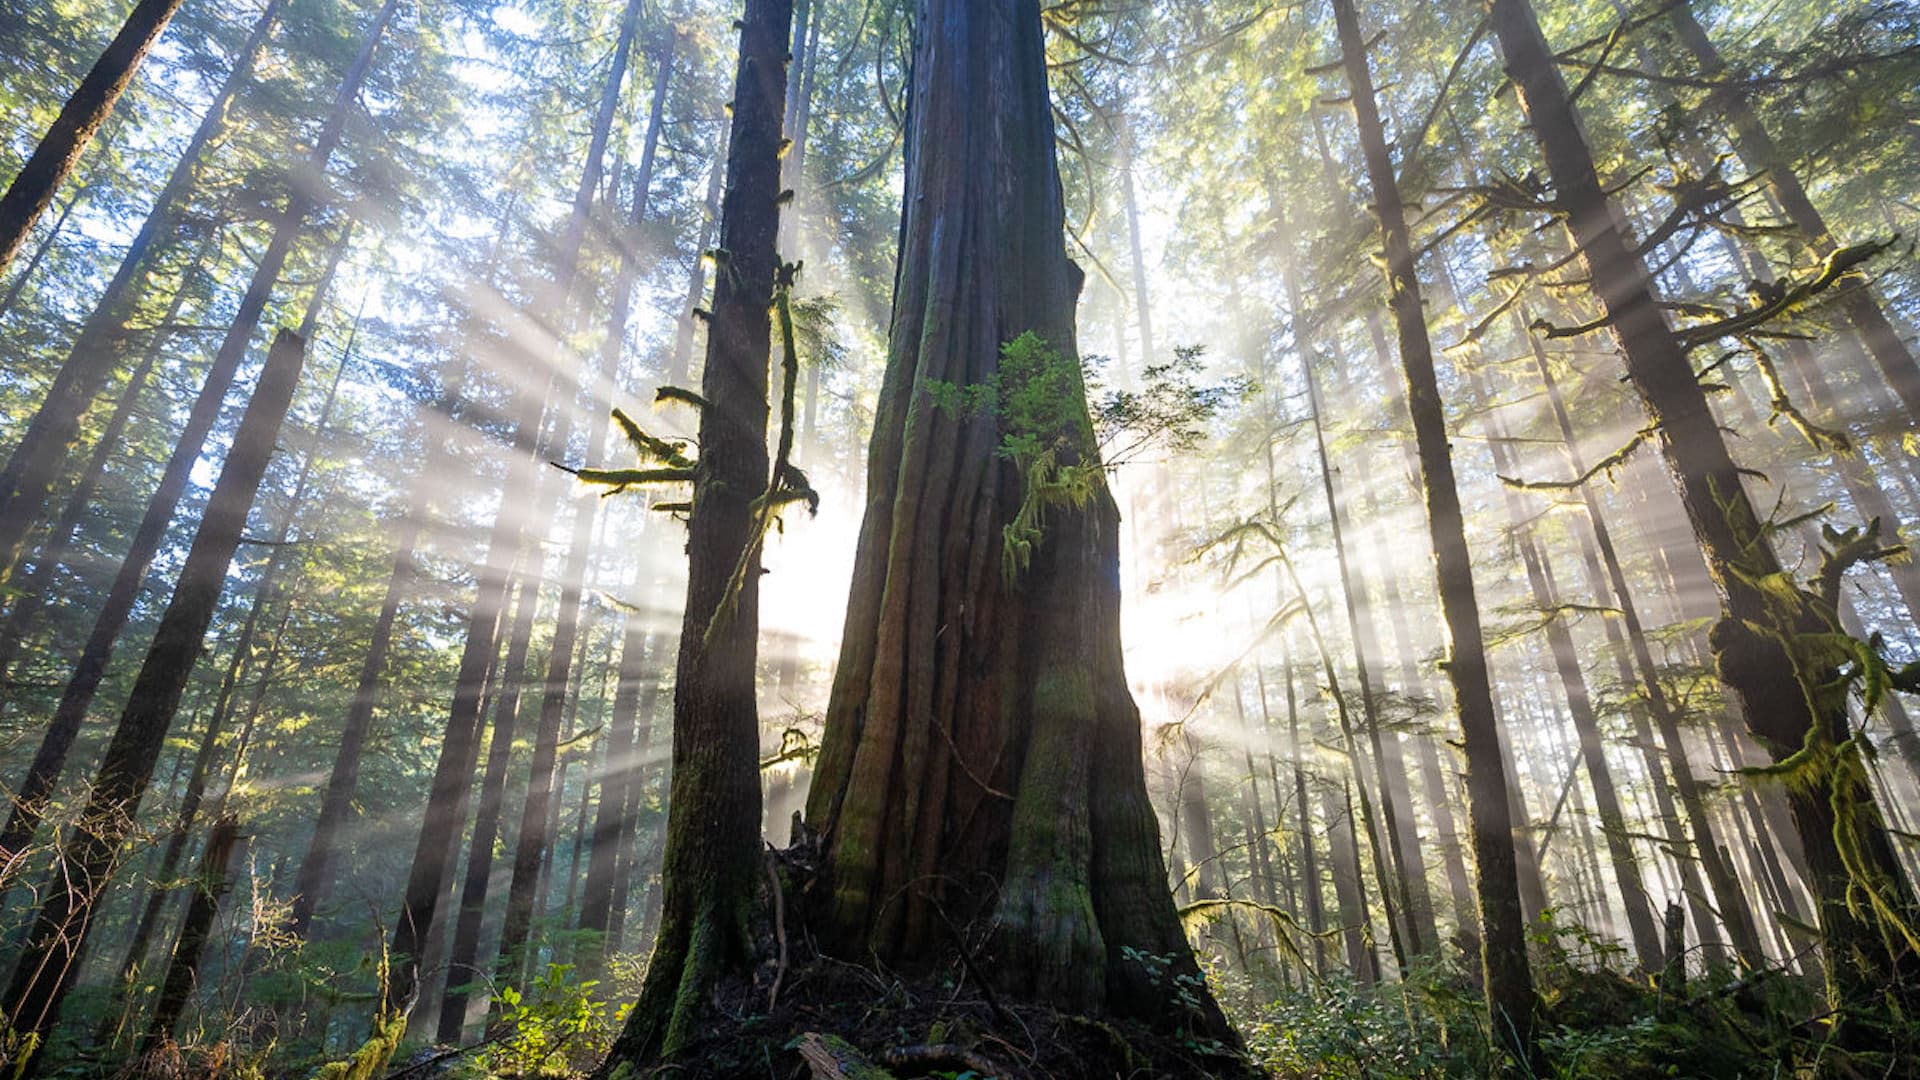 Minister wants your input on future of British Columbia forests